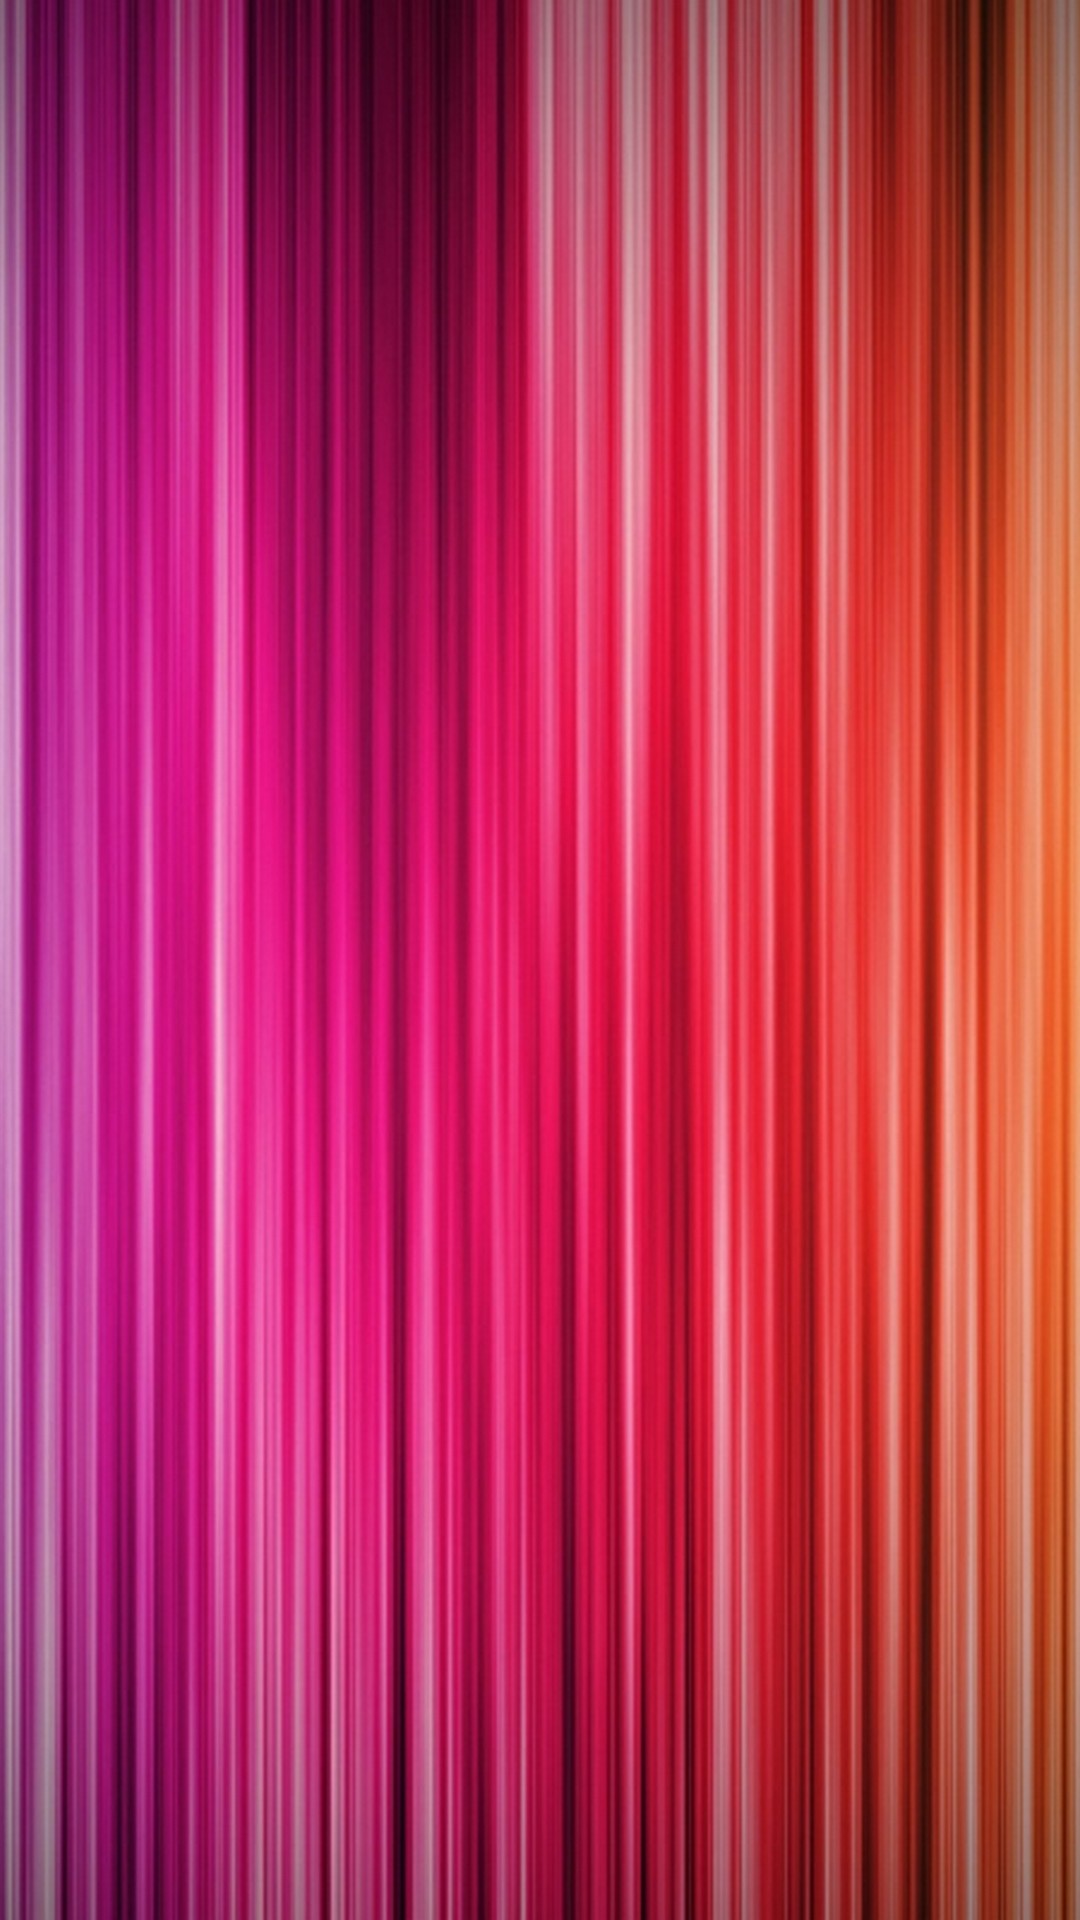 Wallpapers Phone Rainbow Colors with image resolution 1080x1920 pixel. You can make this wallpaper for your Android backgrounds, Tablet, Smartphones Screensavers and Mobile Phone Lock Screen